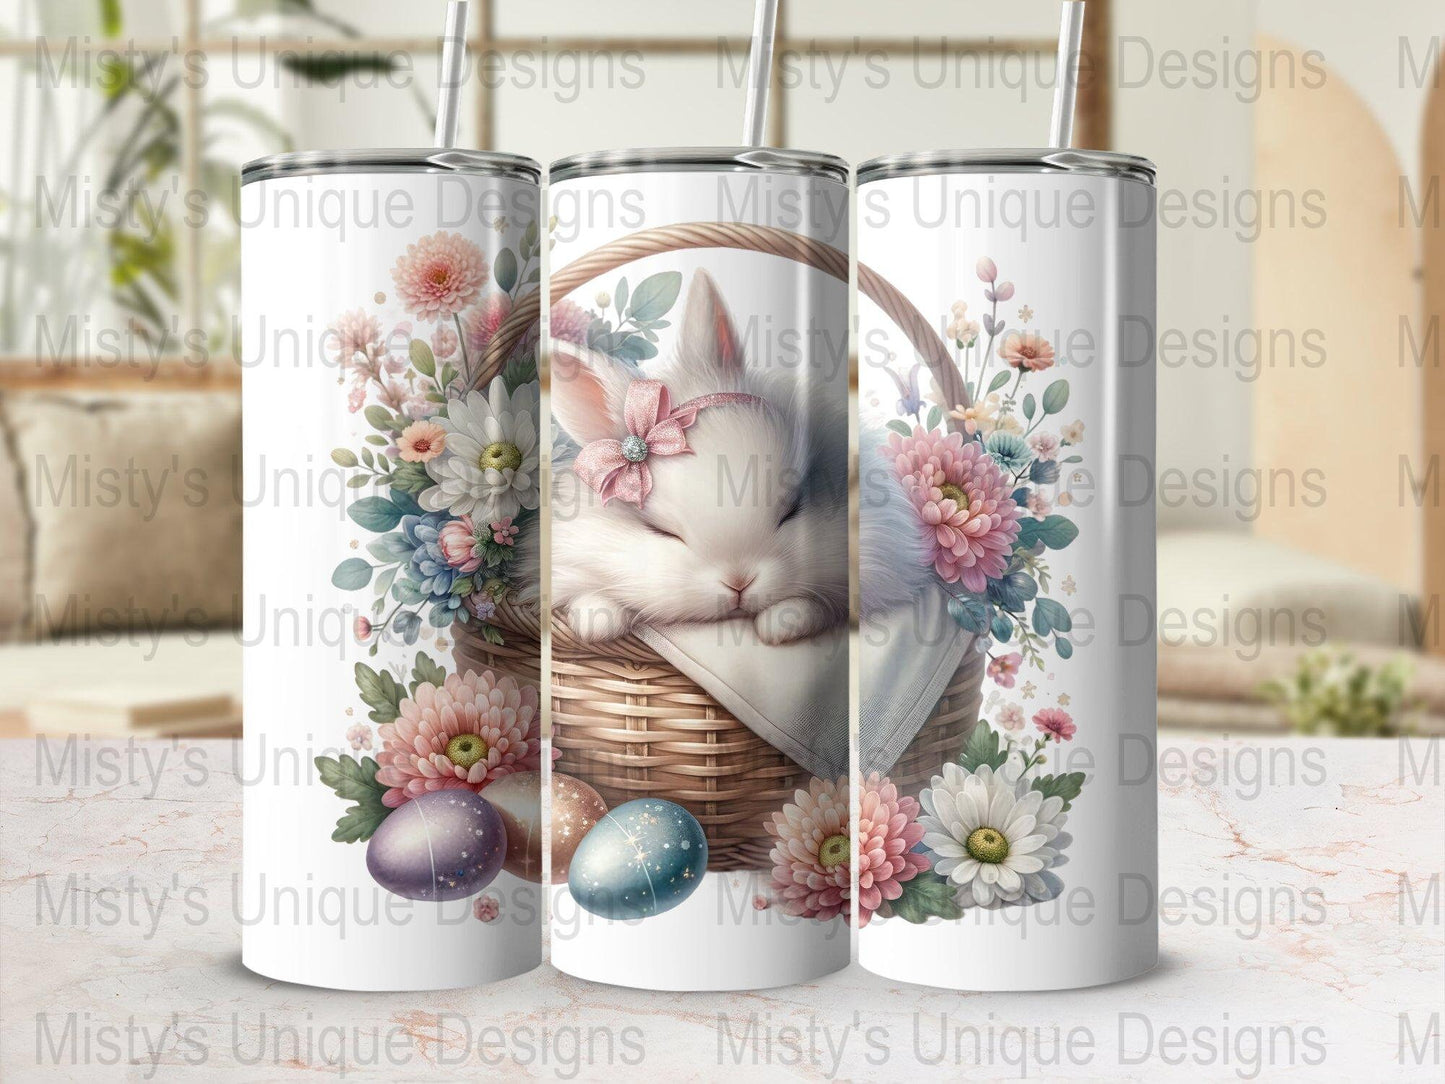 Cute Bunny Clipart, Easter Basket Digital Art, Spring Flowers and Easter Eggs PNG, Printable Clip Art for Crafts, Scrapbooking, Invitations